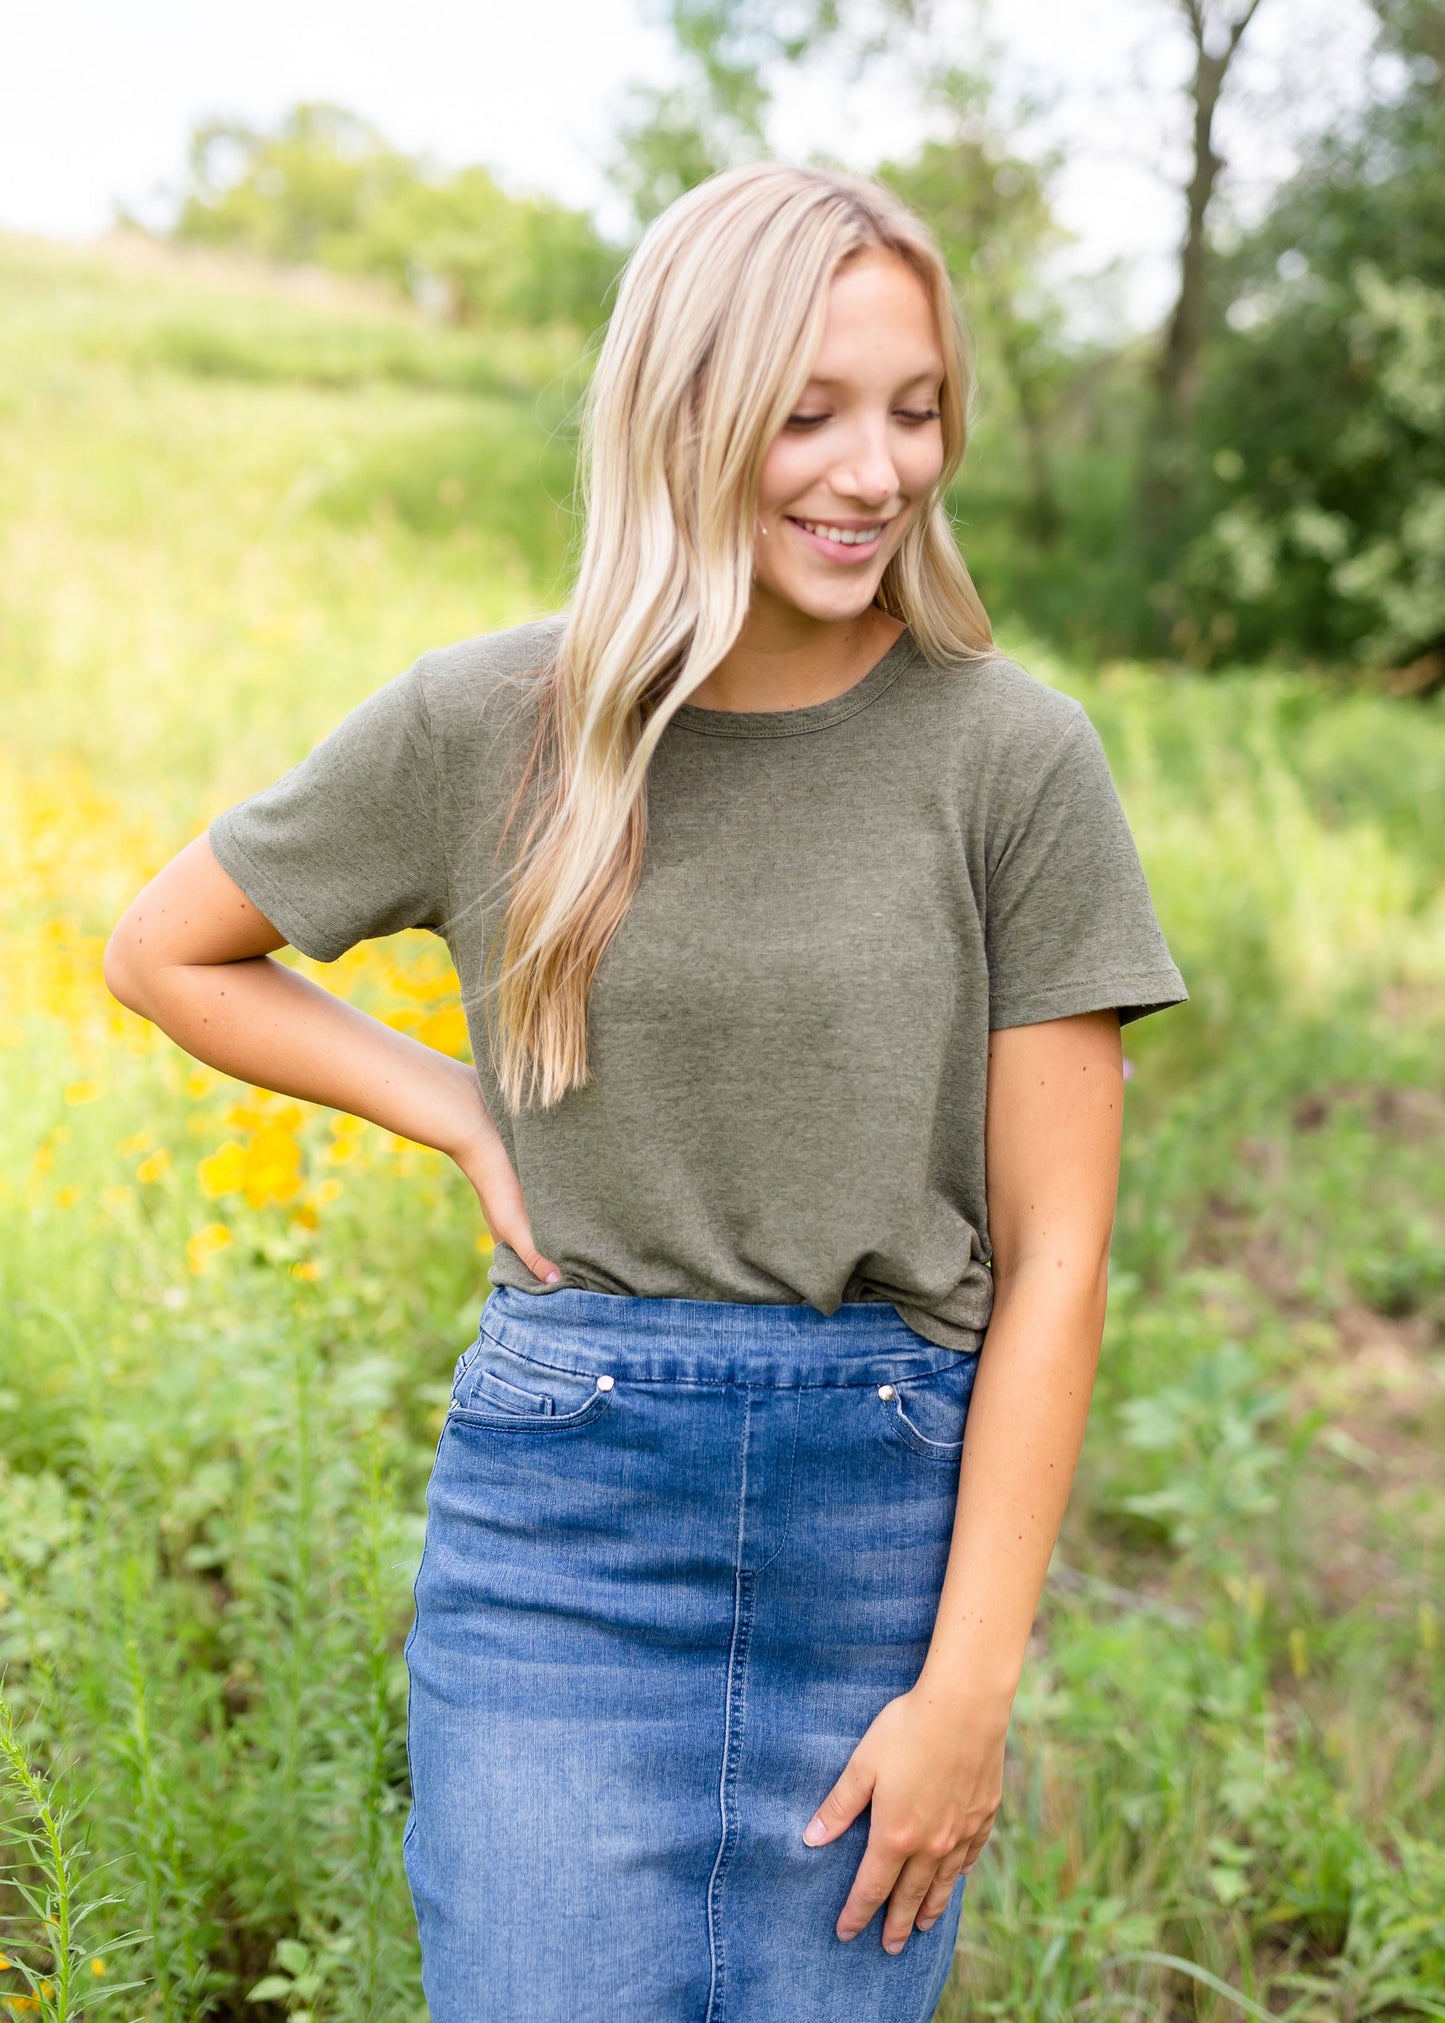 The Lolly Short Sleeve Tee TopsThese Lolly tees are the perfect layering piece coming in 4 colors